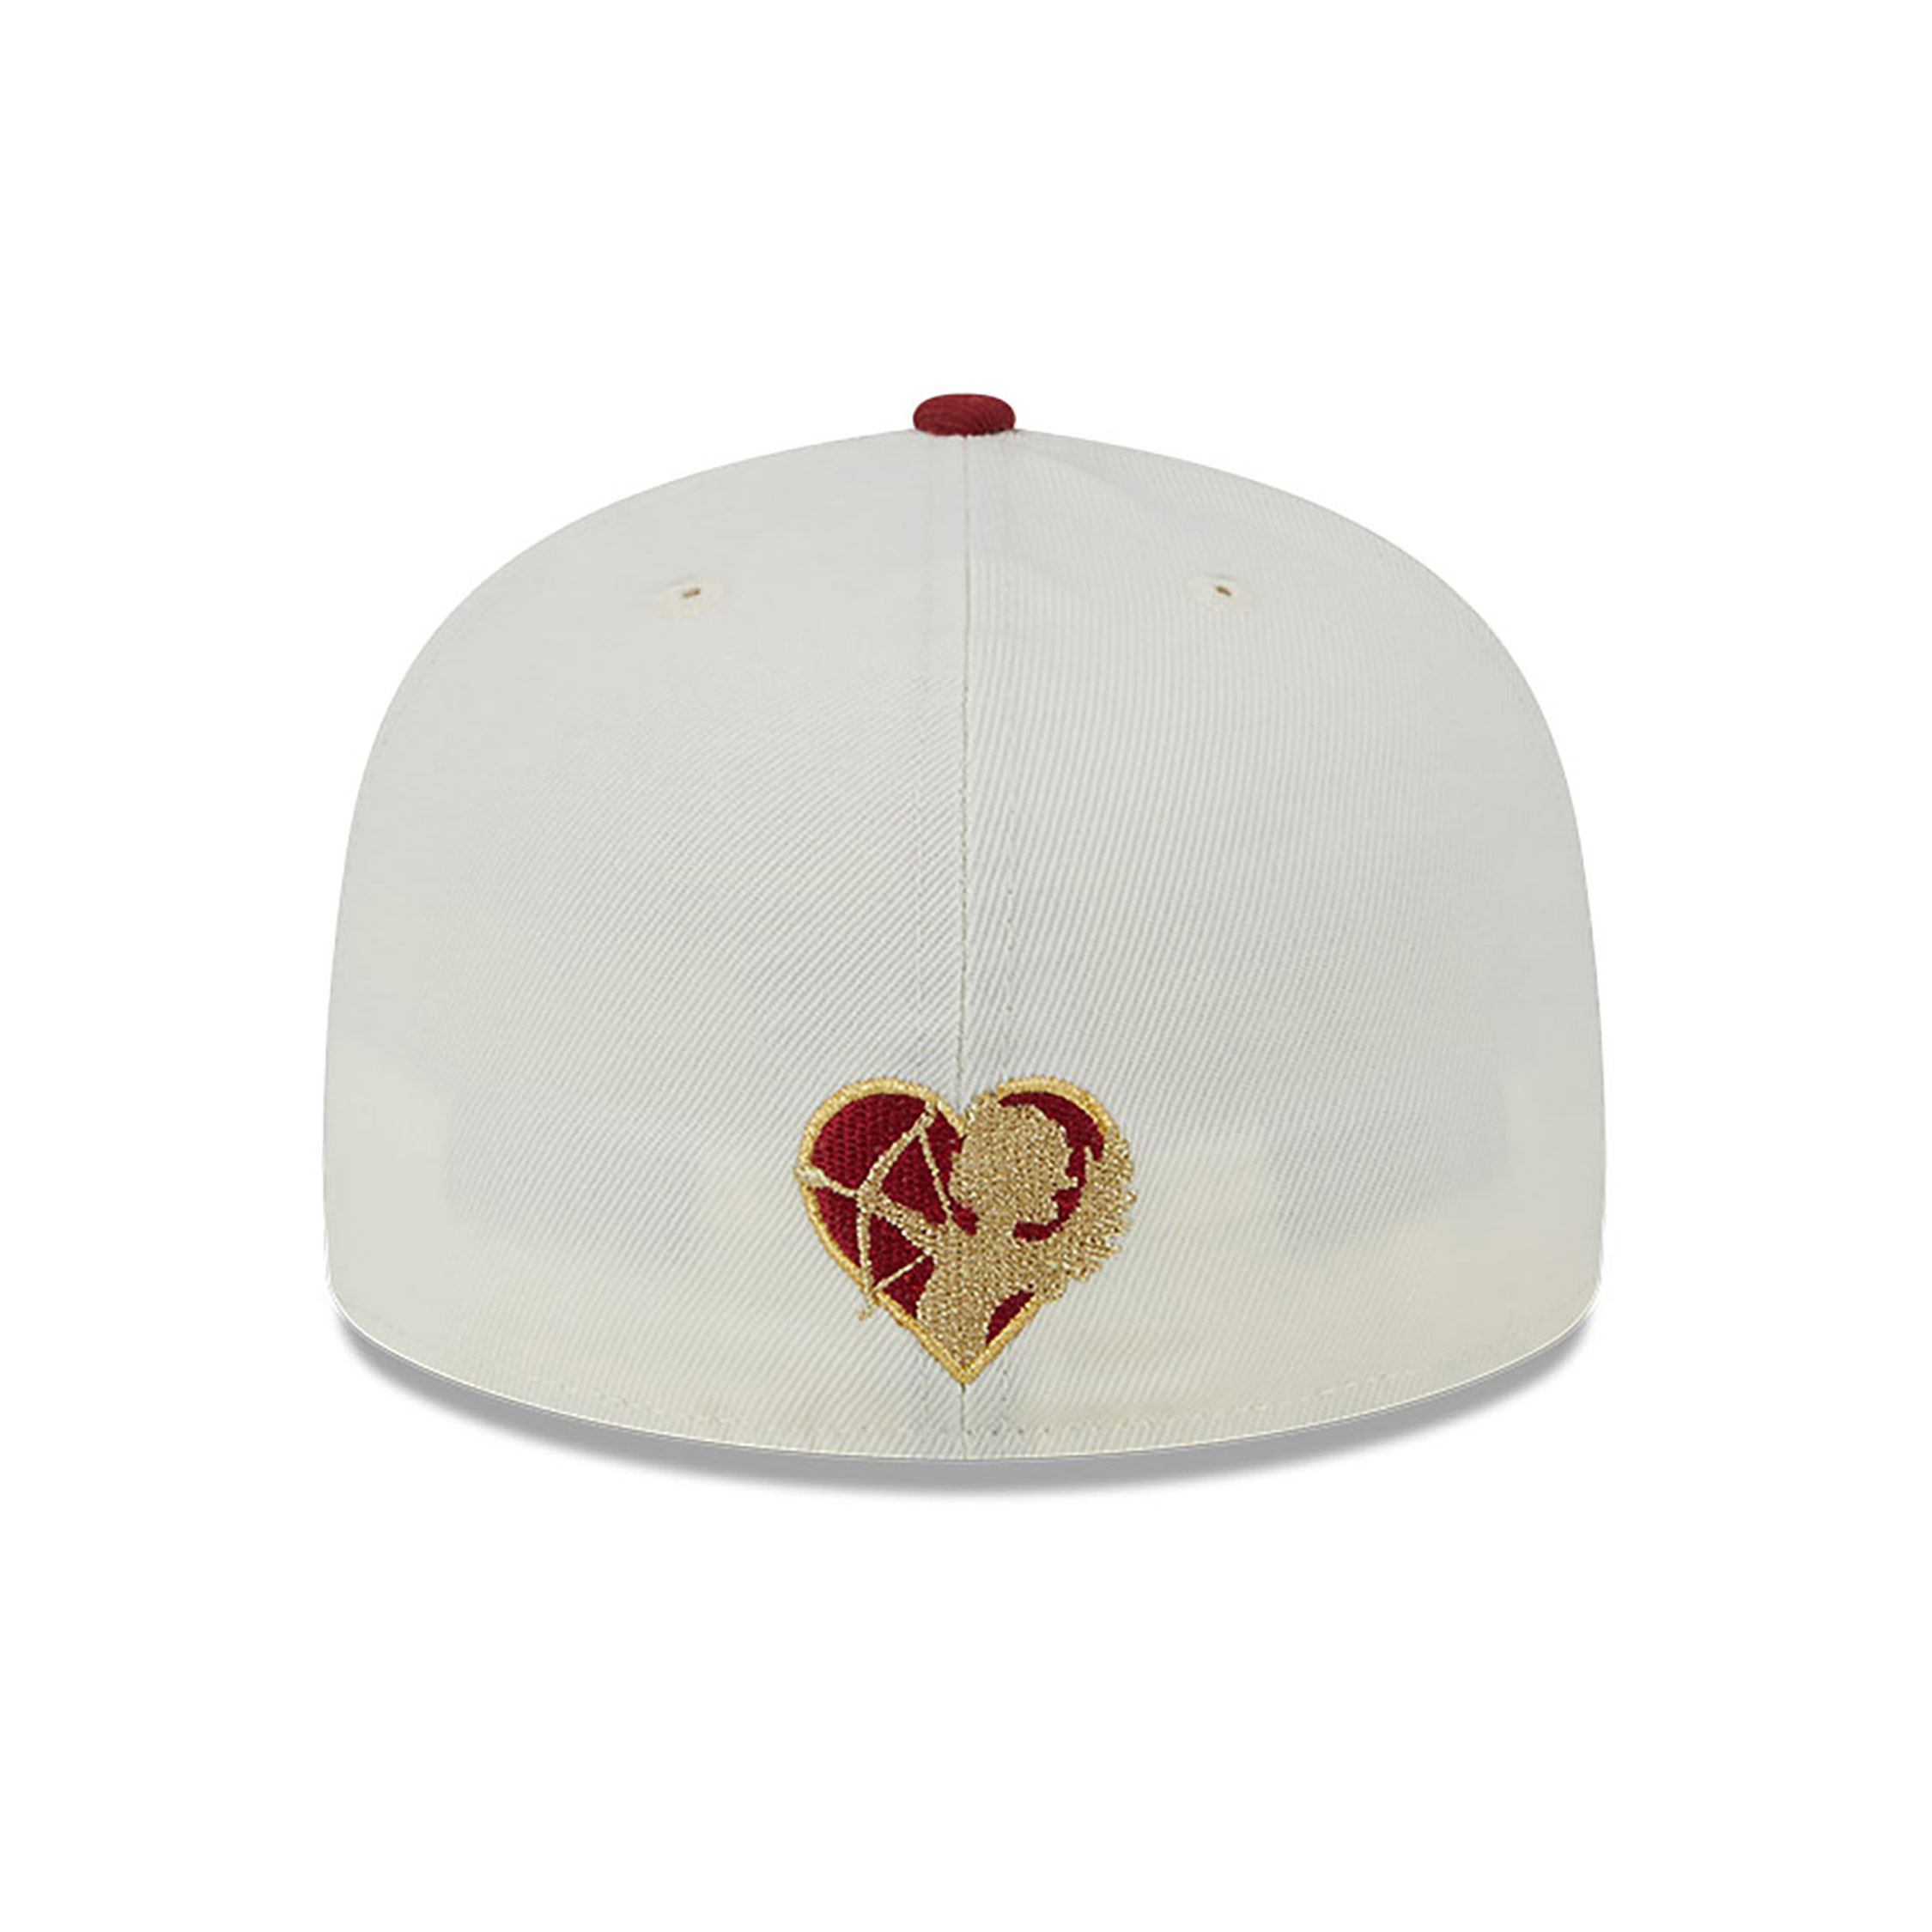 Oakland Athletics Be Mine White 59FIFTY Fitted Cap